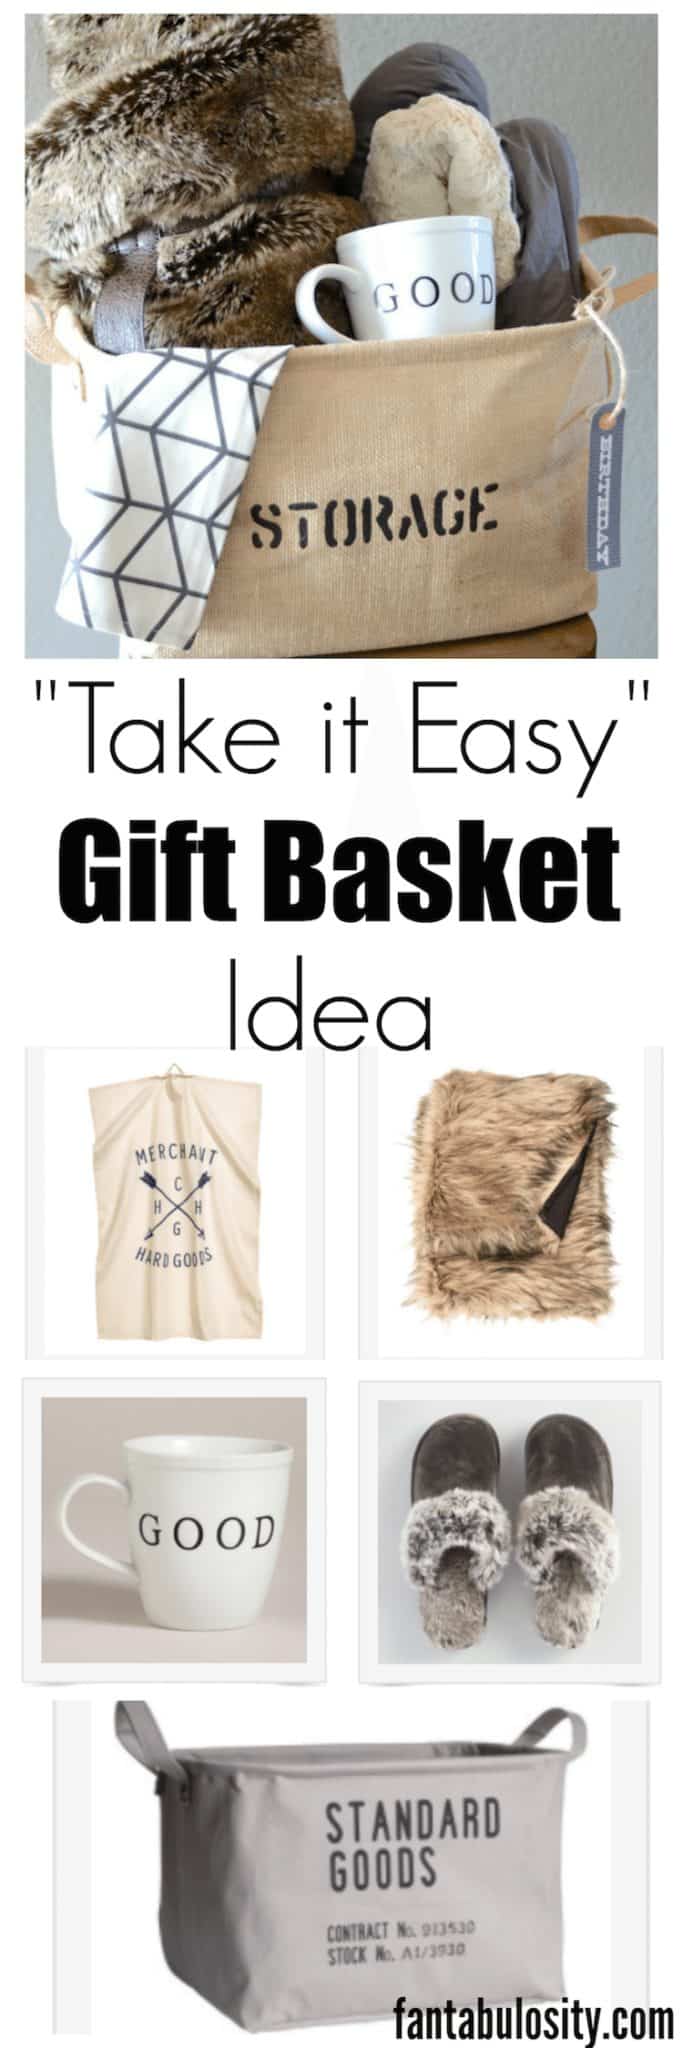 Take it Easy Relaxation Gift Basket Idea for Men or Women: This simple gift idea is perfect for any man or woman for ANY occasion! Who wouldn't love a basket with an excuse to relax!